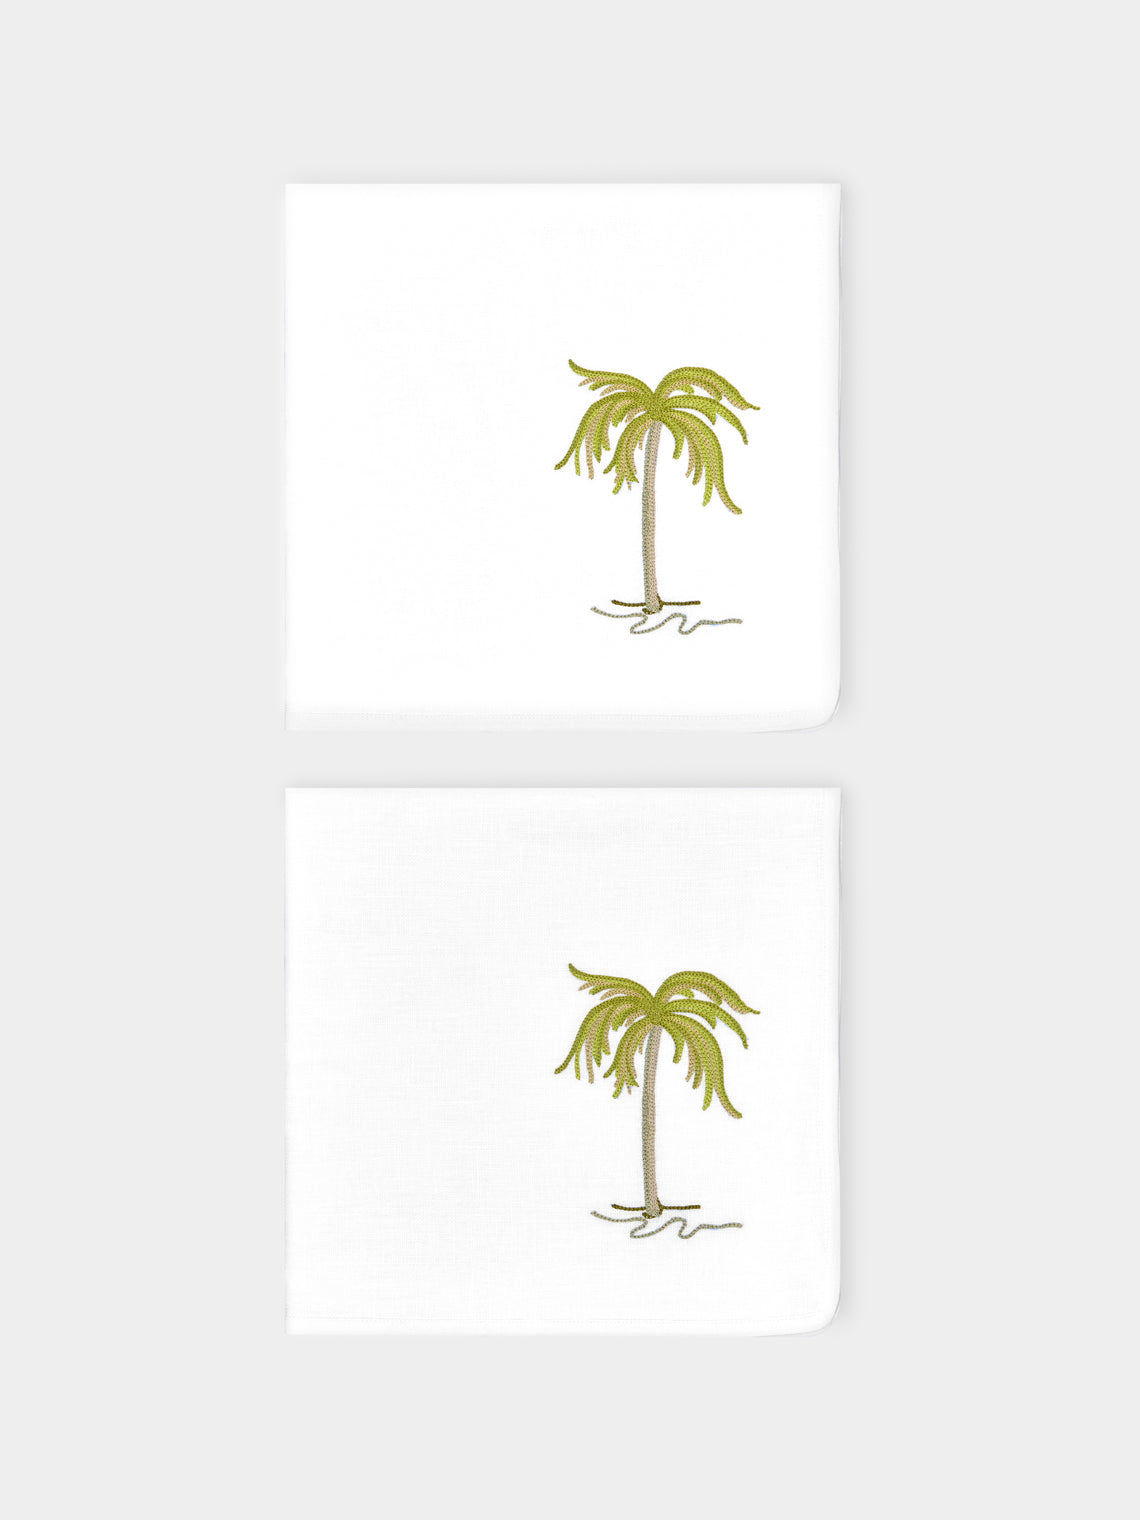 Loretta Caponi - Palm Tree Hand-Embroidered Linen Napkins (Set of 2) -  - ABASK